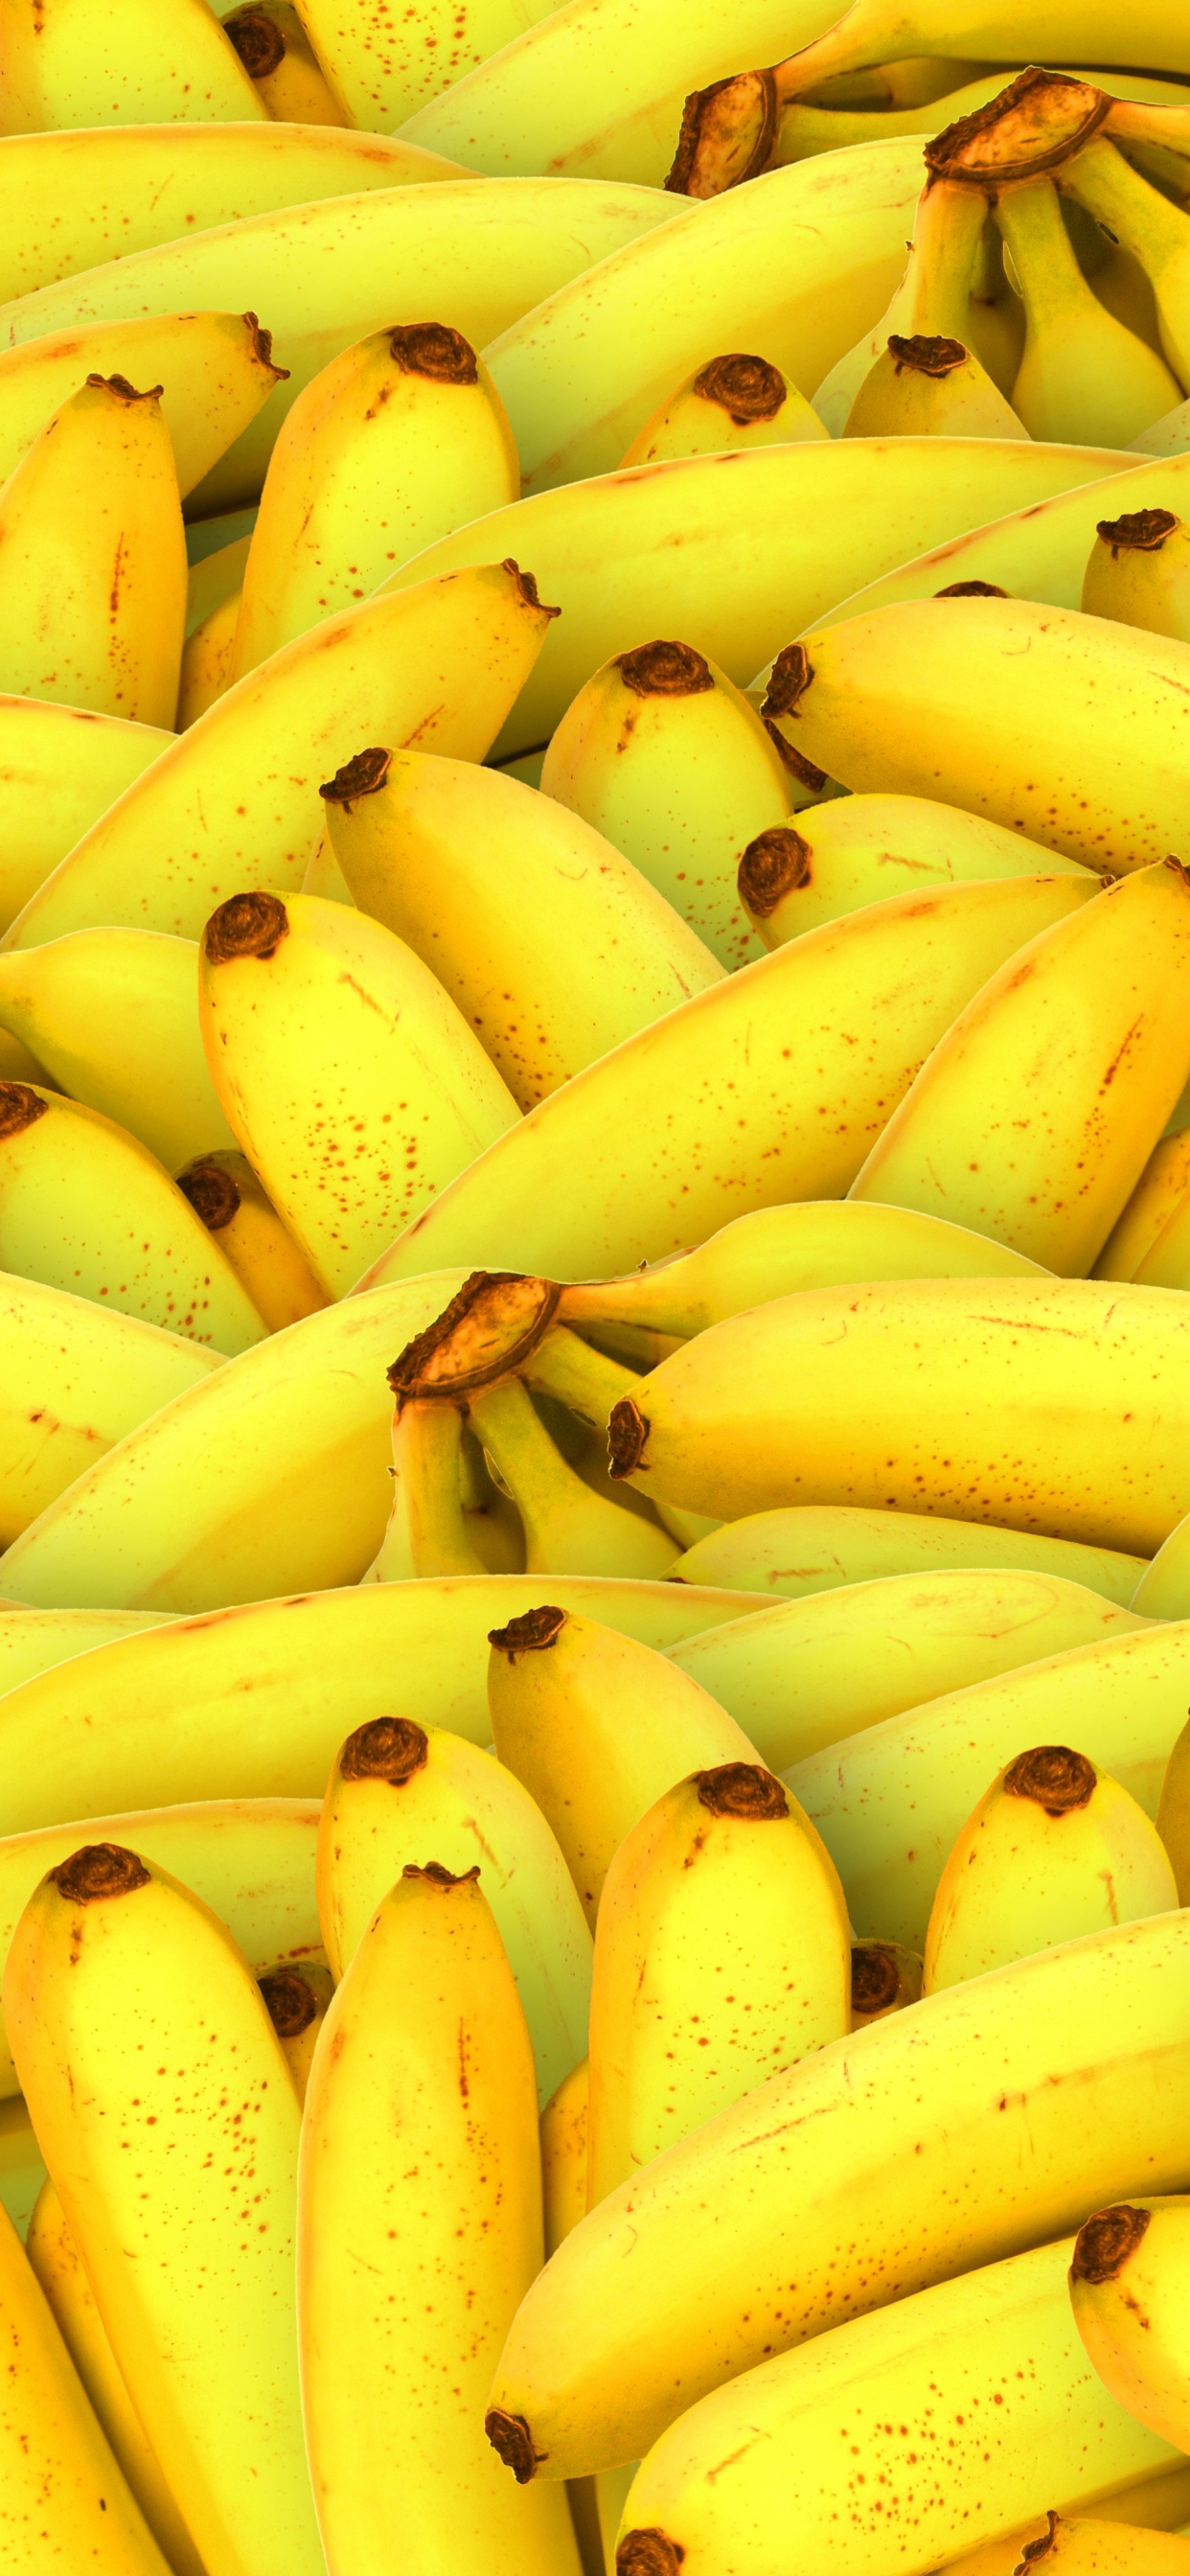 Yellow Banana Fruit on Brown Wooden Table. Wallpaper in 1242x2688 Resolution